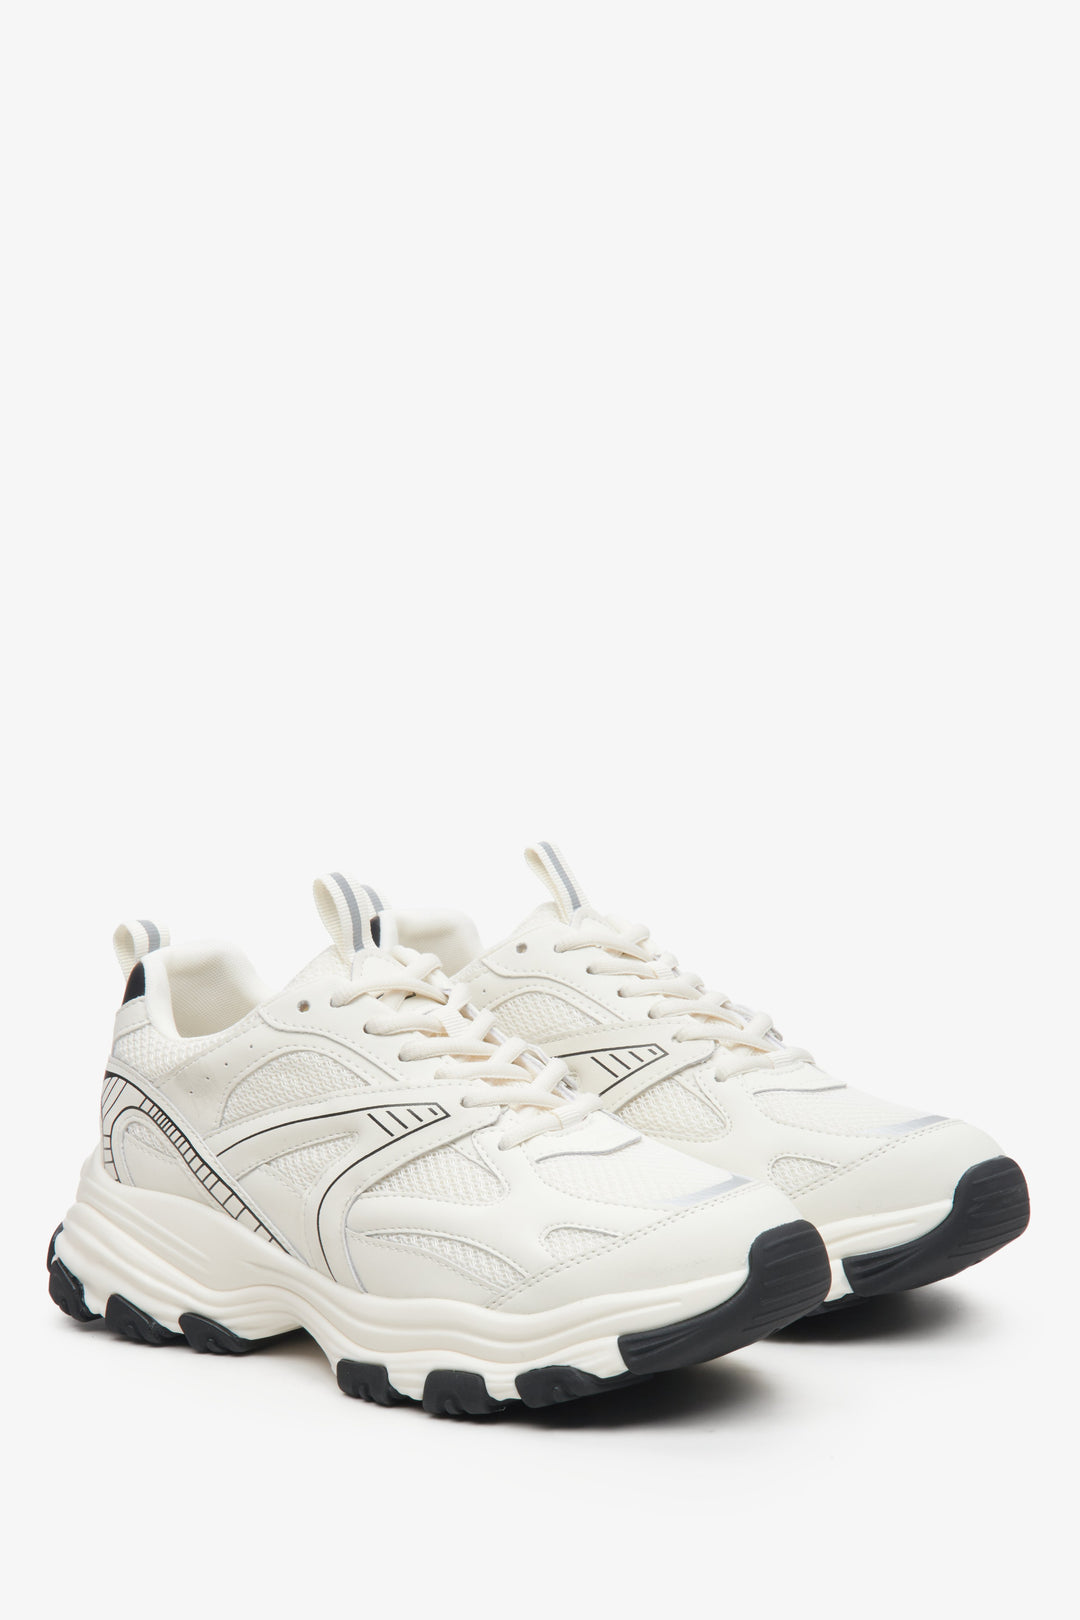 ES8 women's sporty milky and beige sneakers with silver accents.